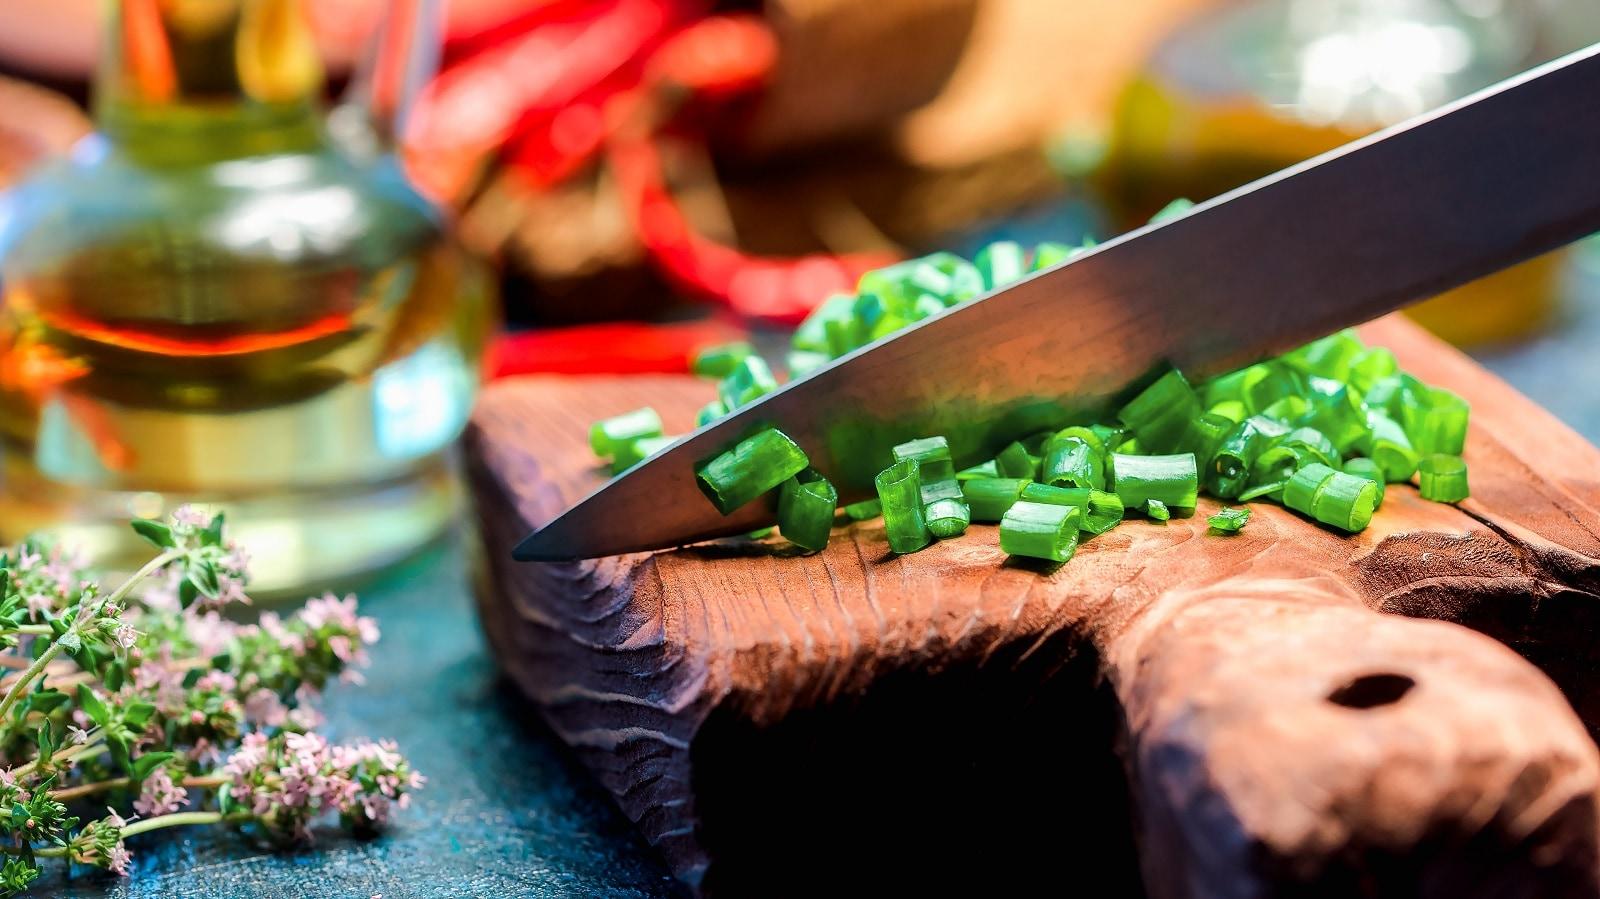 Knife poised to cut green onions on a wooden cutting board